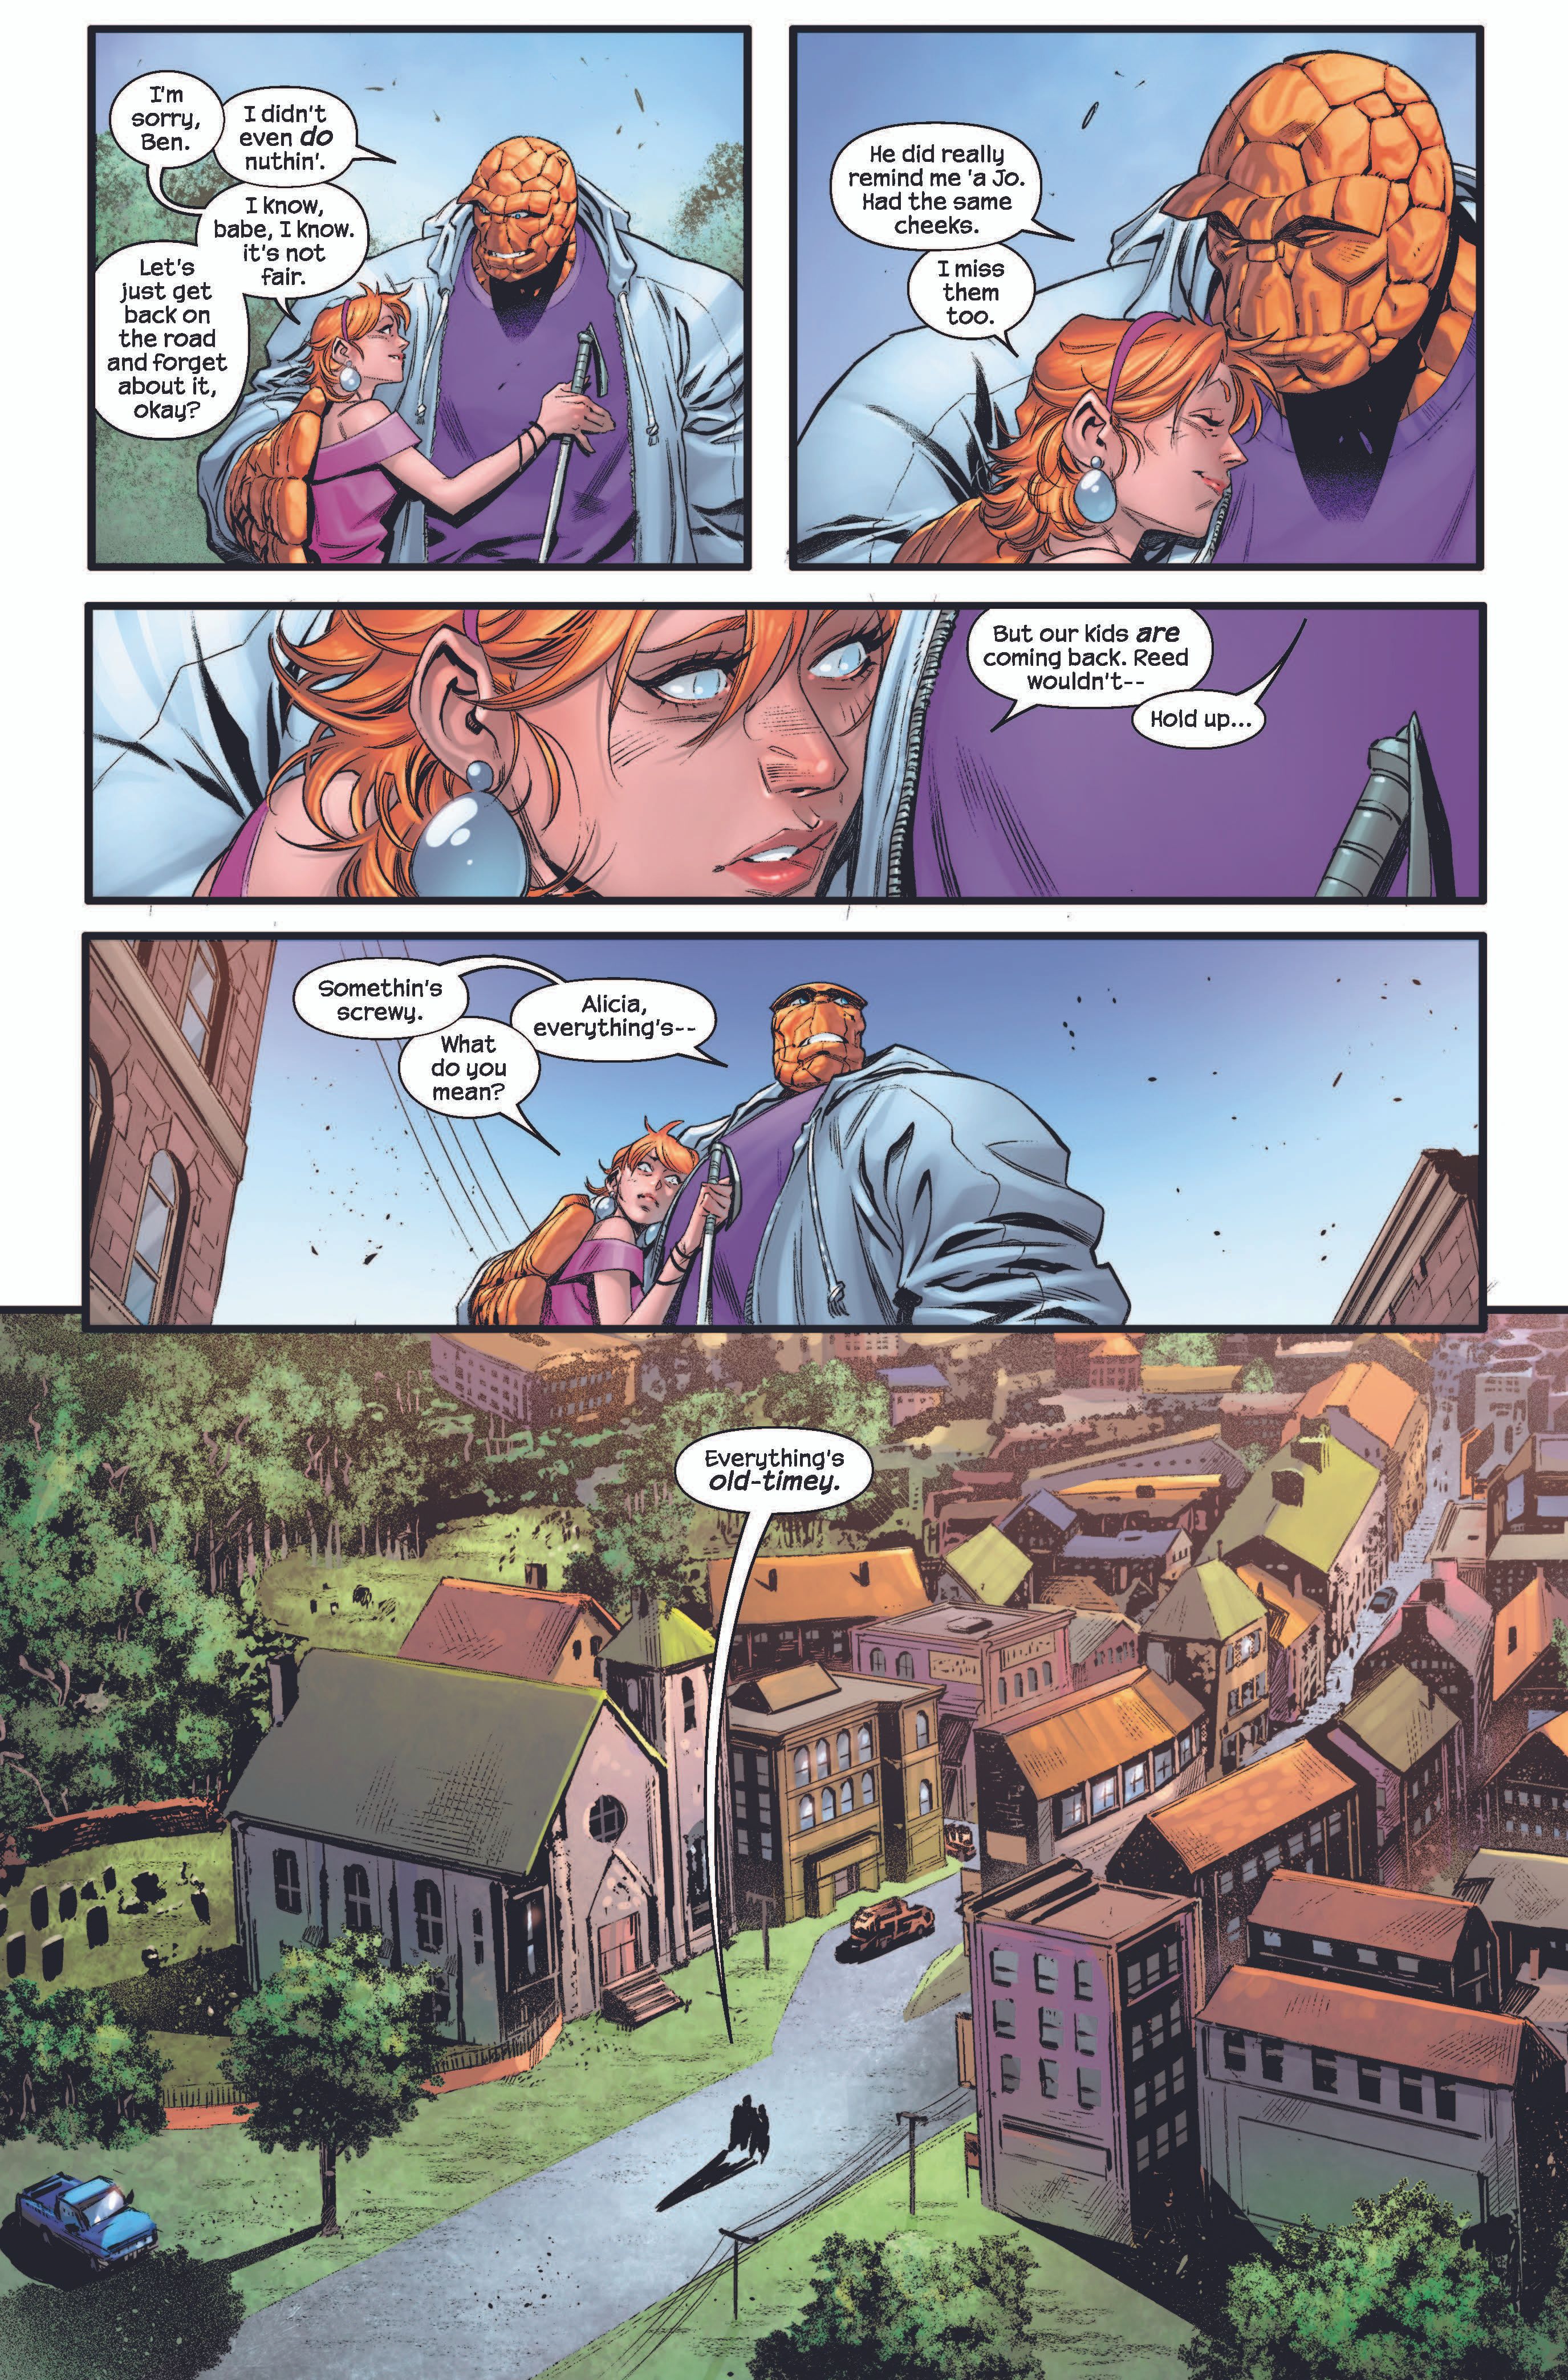 FF2022001_Preview_Page_5